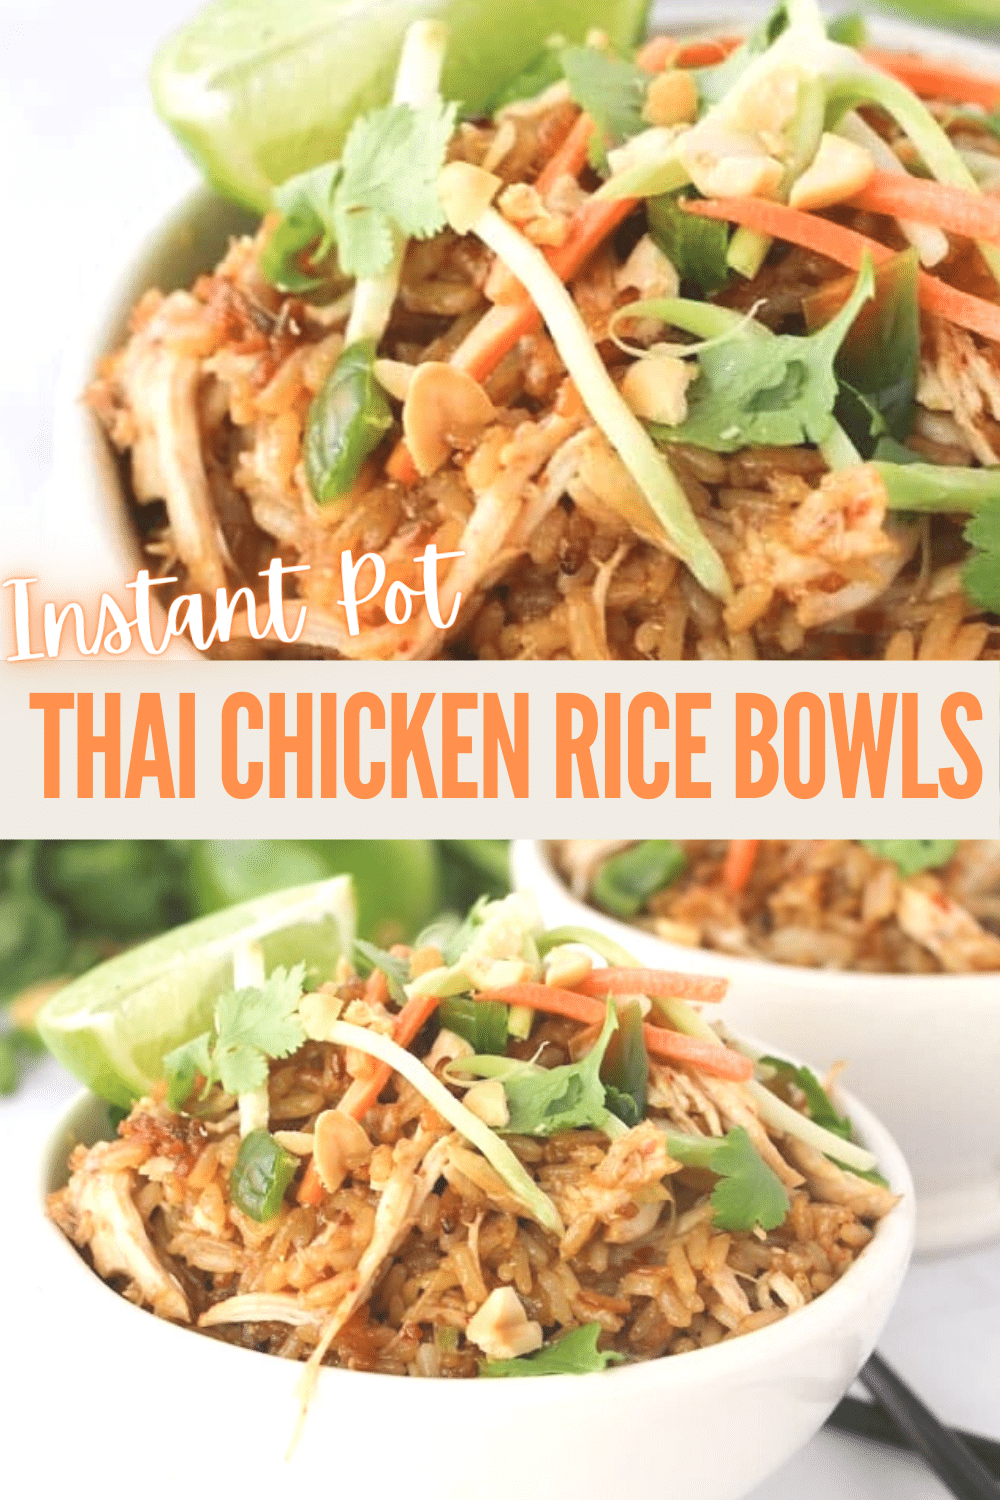 These Instant Pot Thai Chicken Rice Bowls are packed with traditional Thai flavors and unbelievably easy to make. Perfect for dinner or lunch! #instantpot #pressurecooker #thaifood #chicken #ricebowls via @wondermomwannab